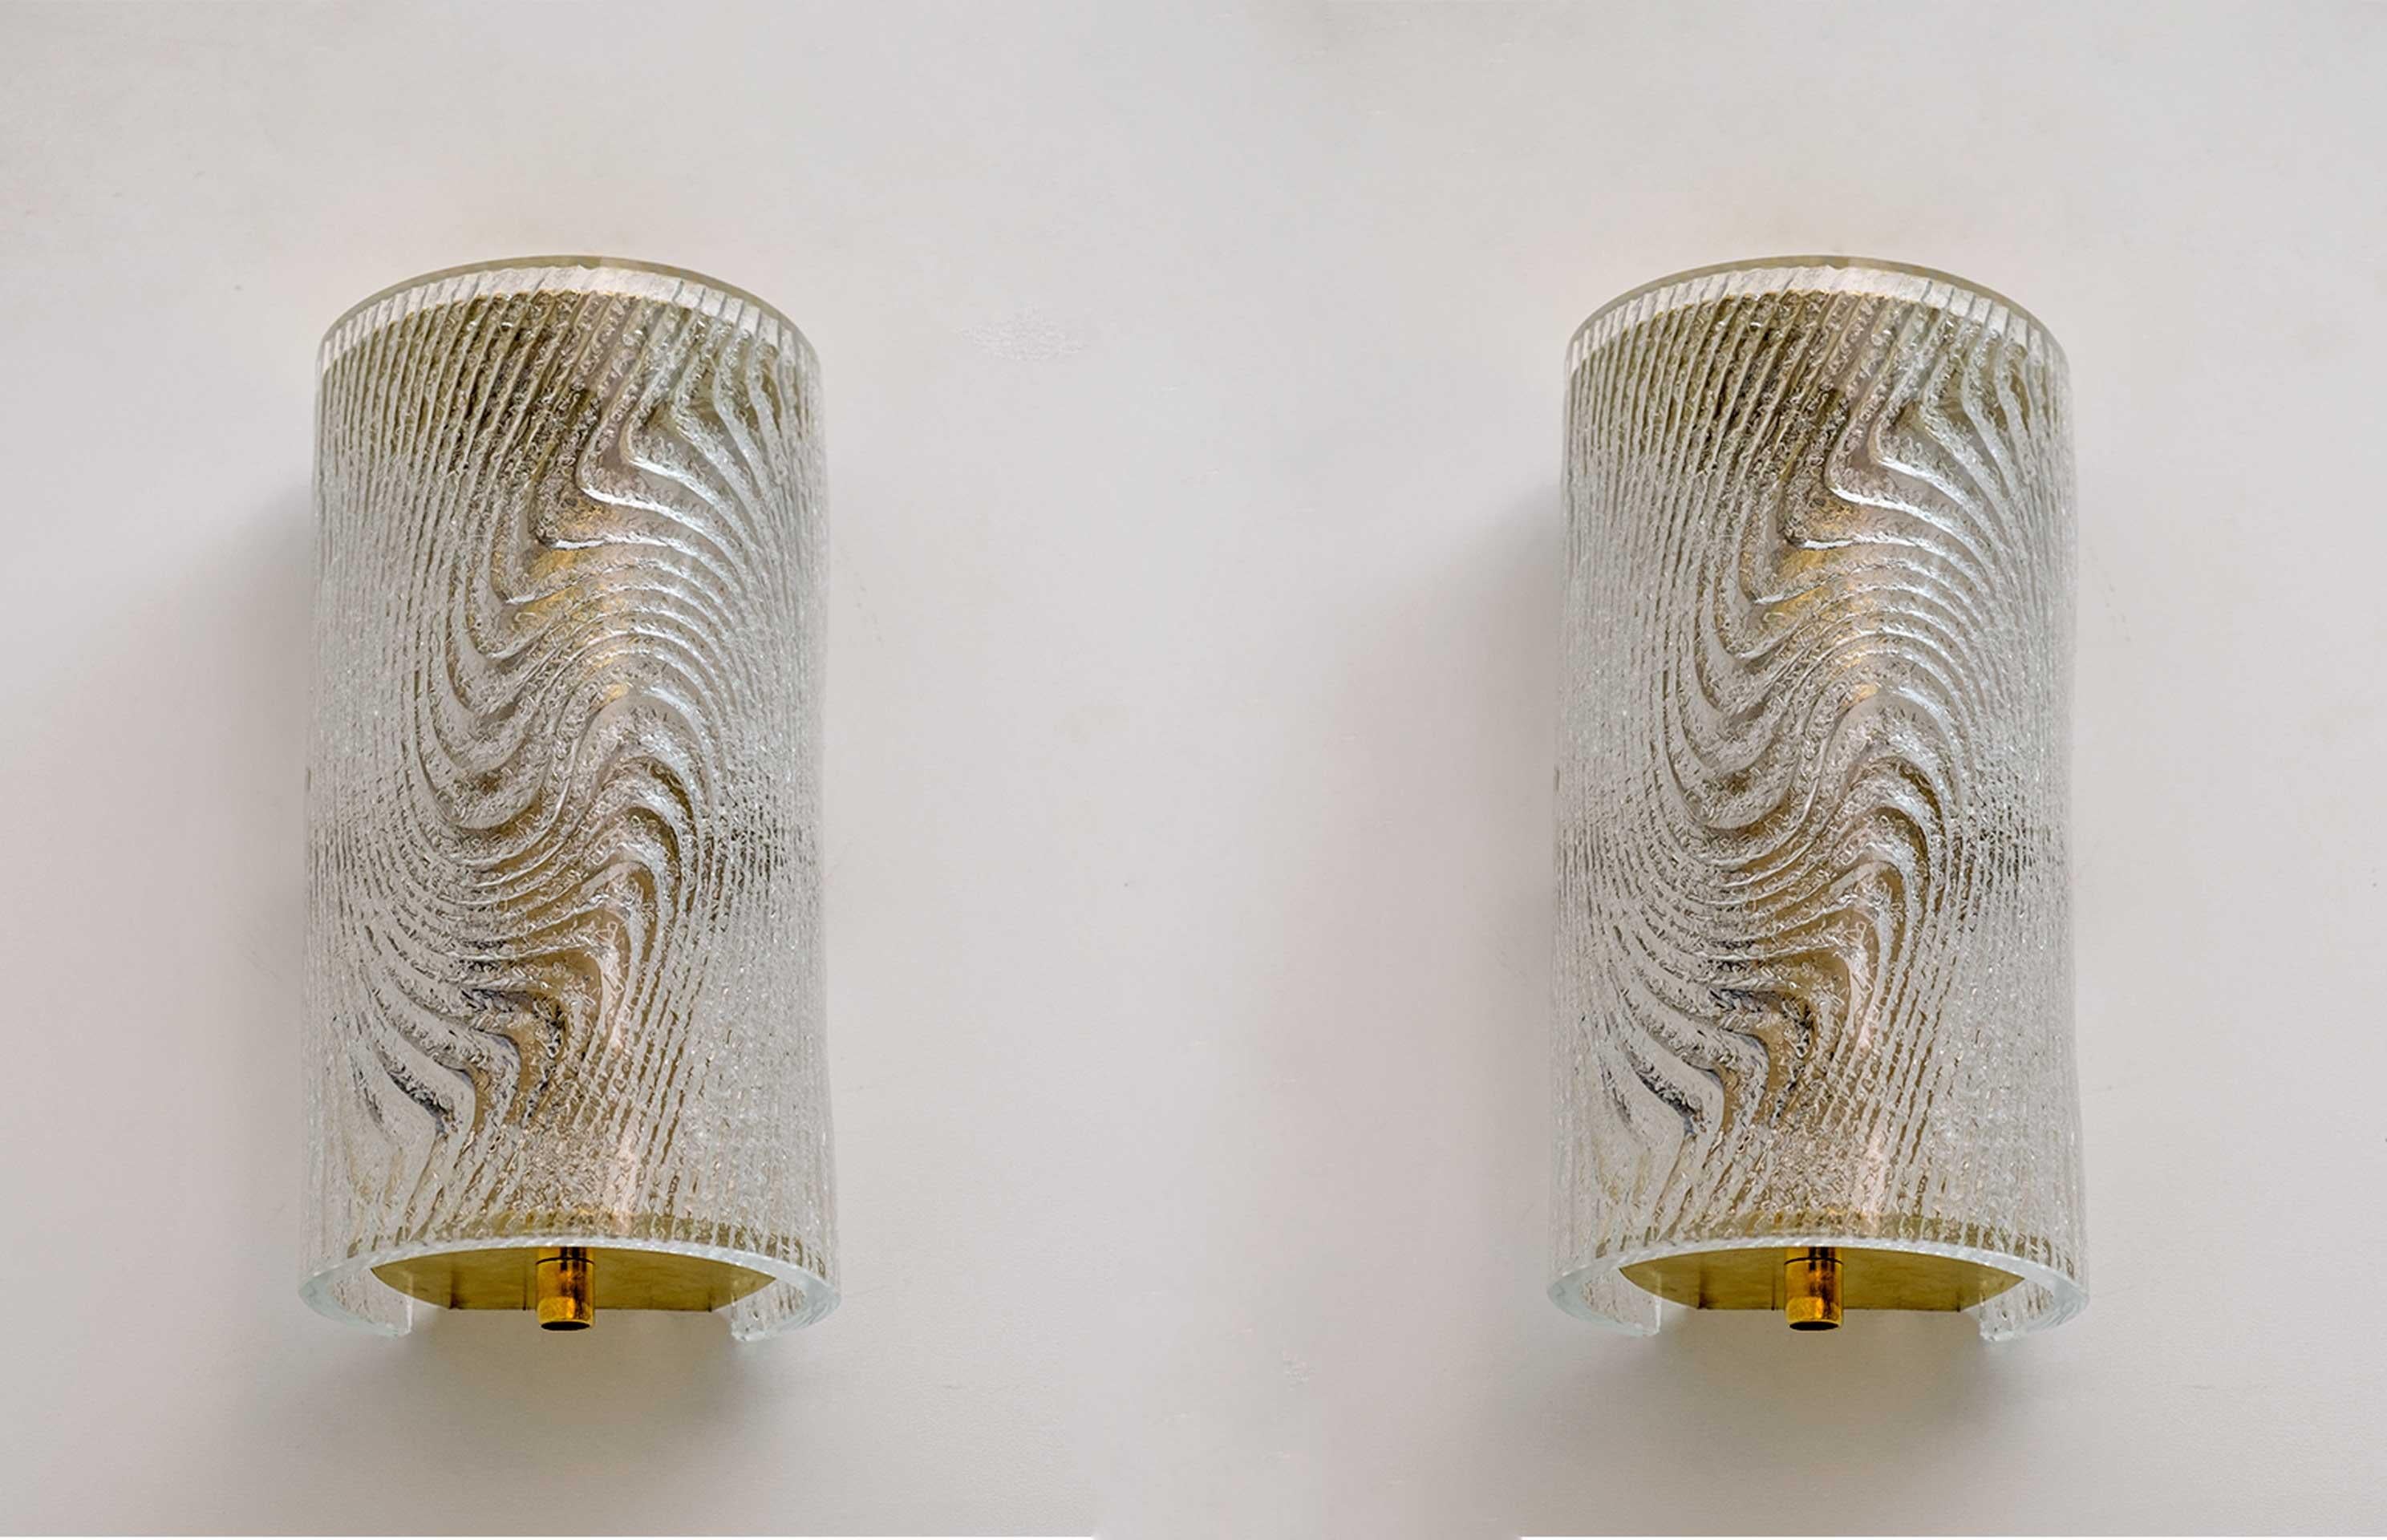 Pair of vintage Italian Murano glass wall lights, produced by the Masters of Murano, 